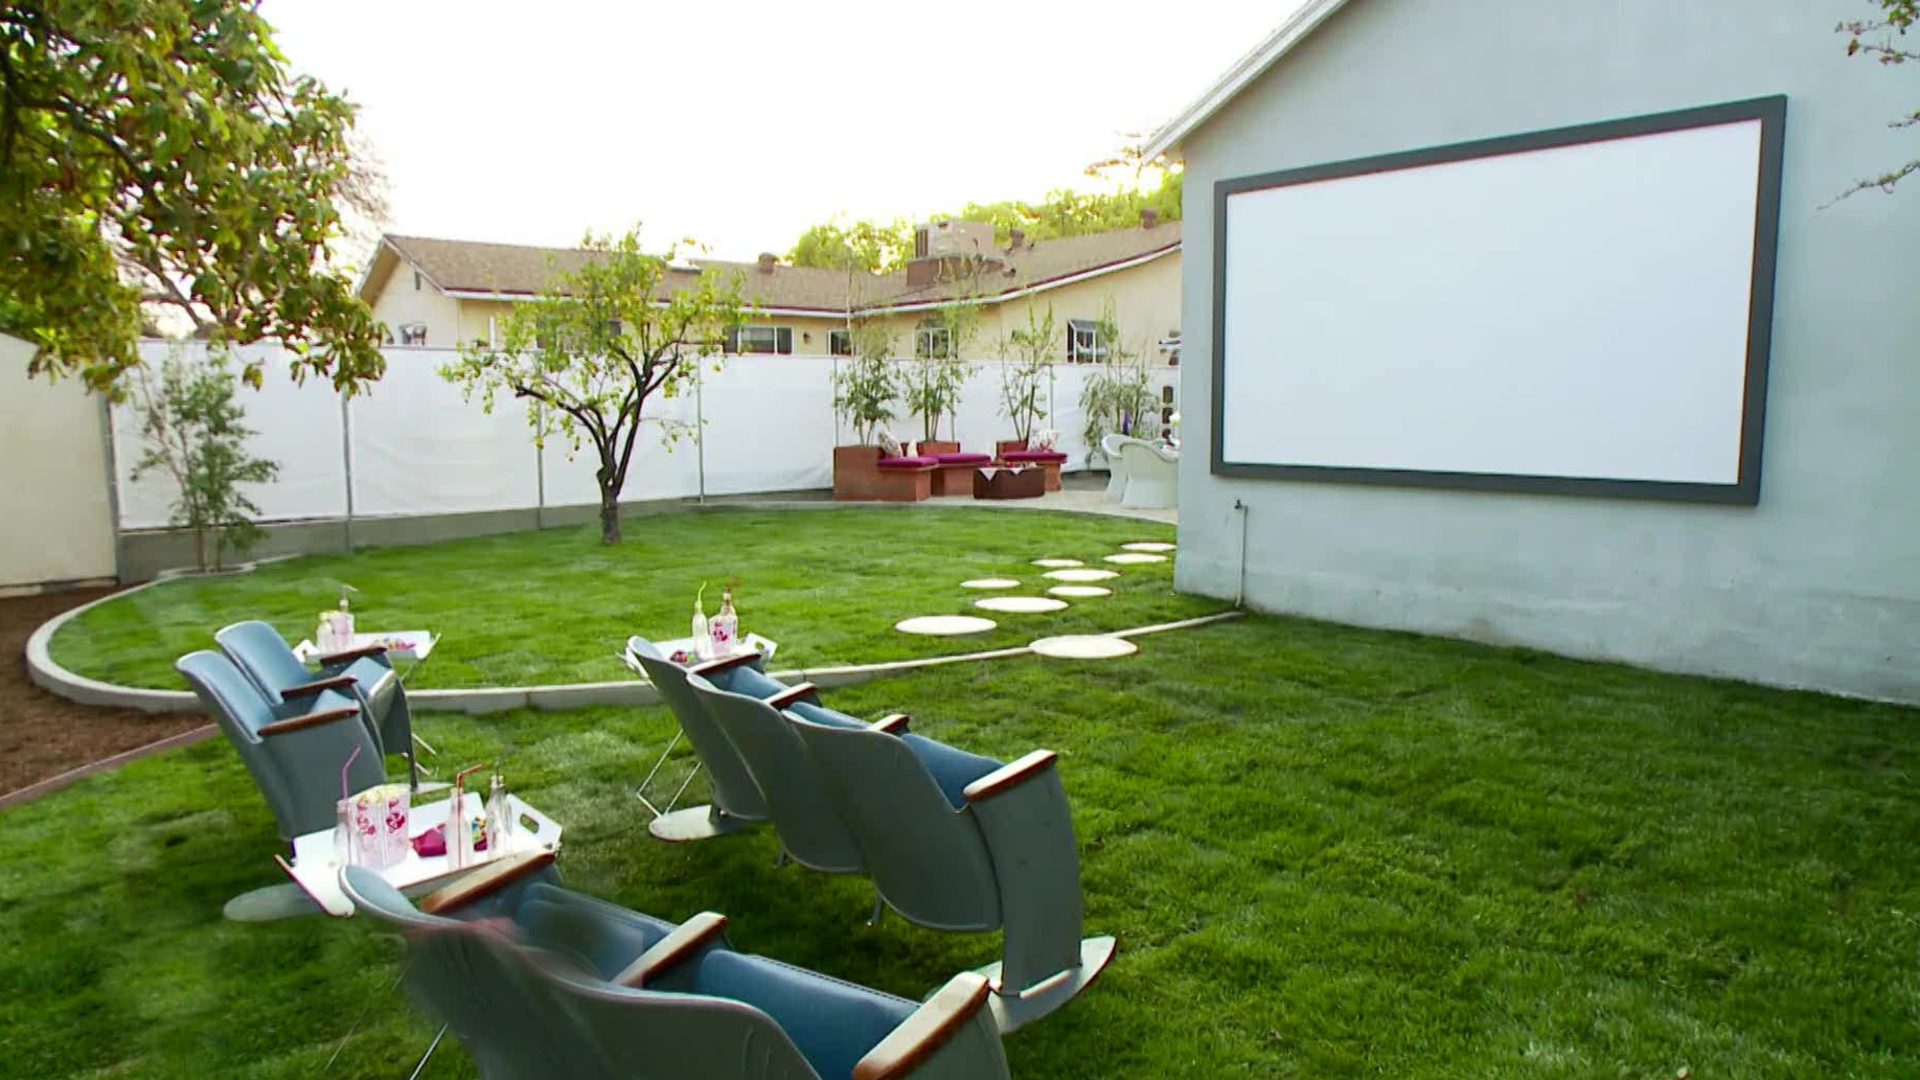 Backyard Makeover with Outdoor Movie Theater Video | HGTV